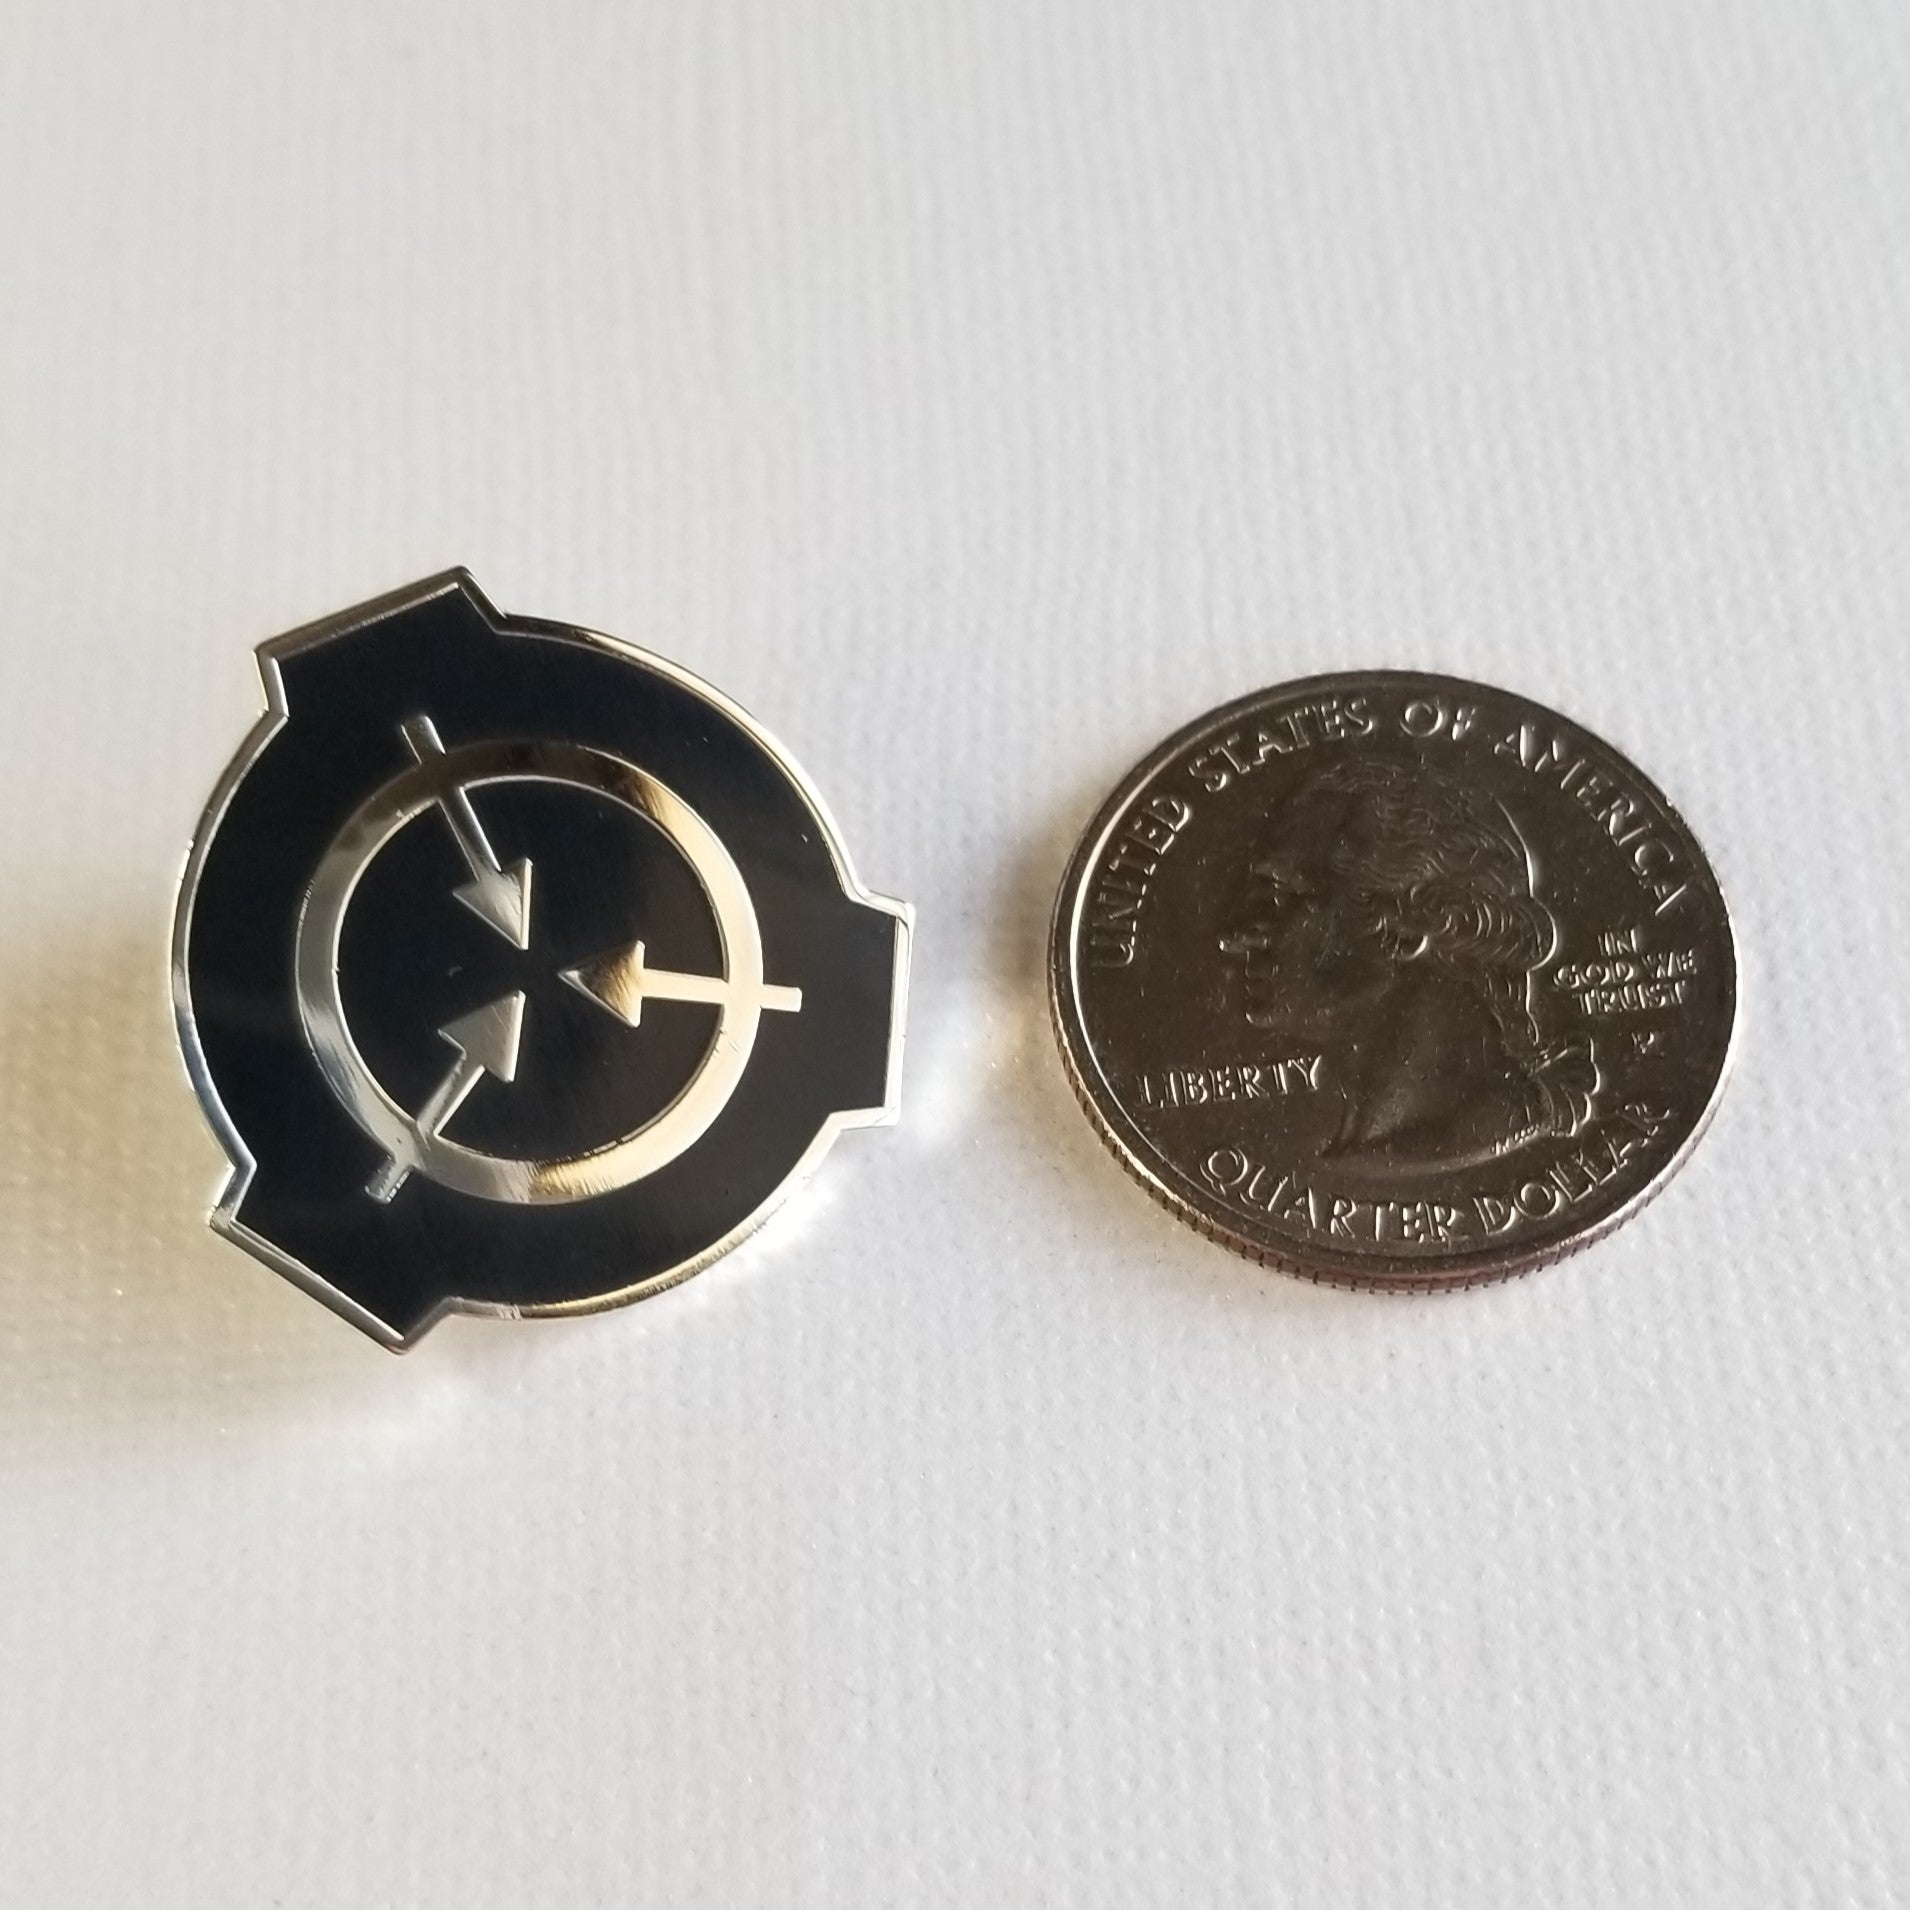 Scp 939 Pins and Buttons for Sale